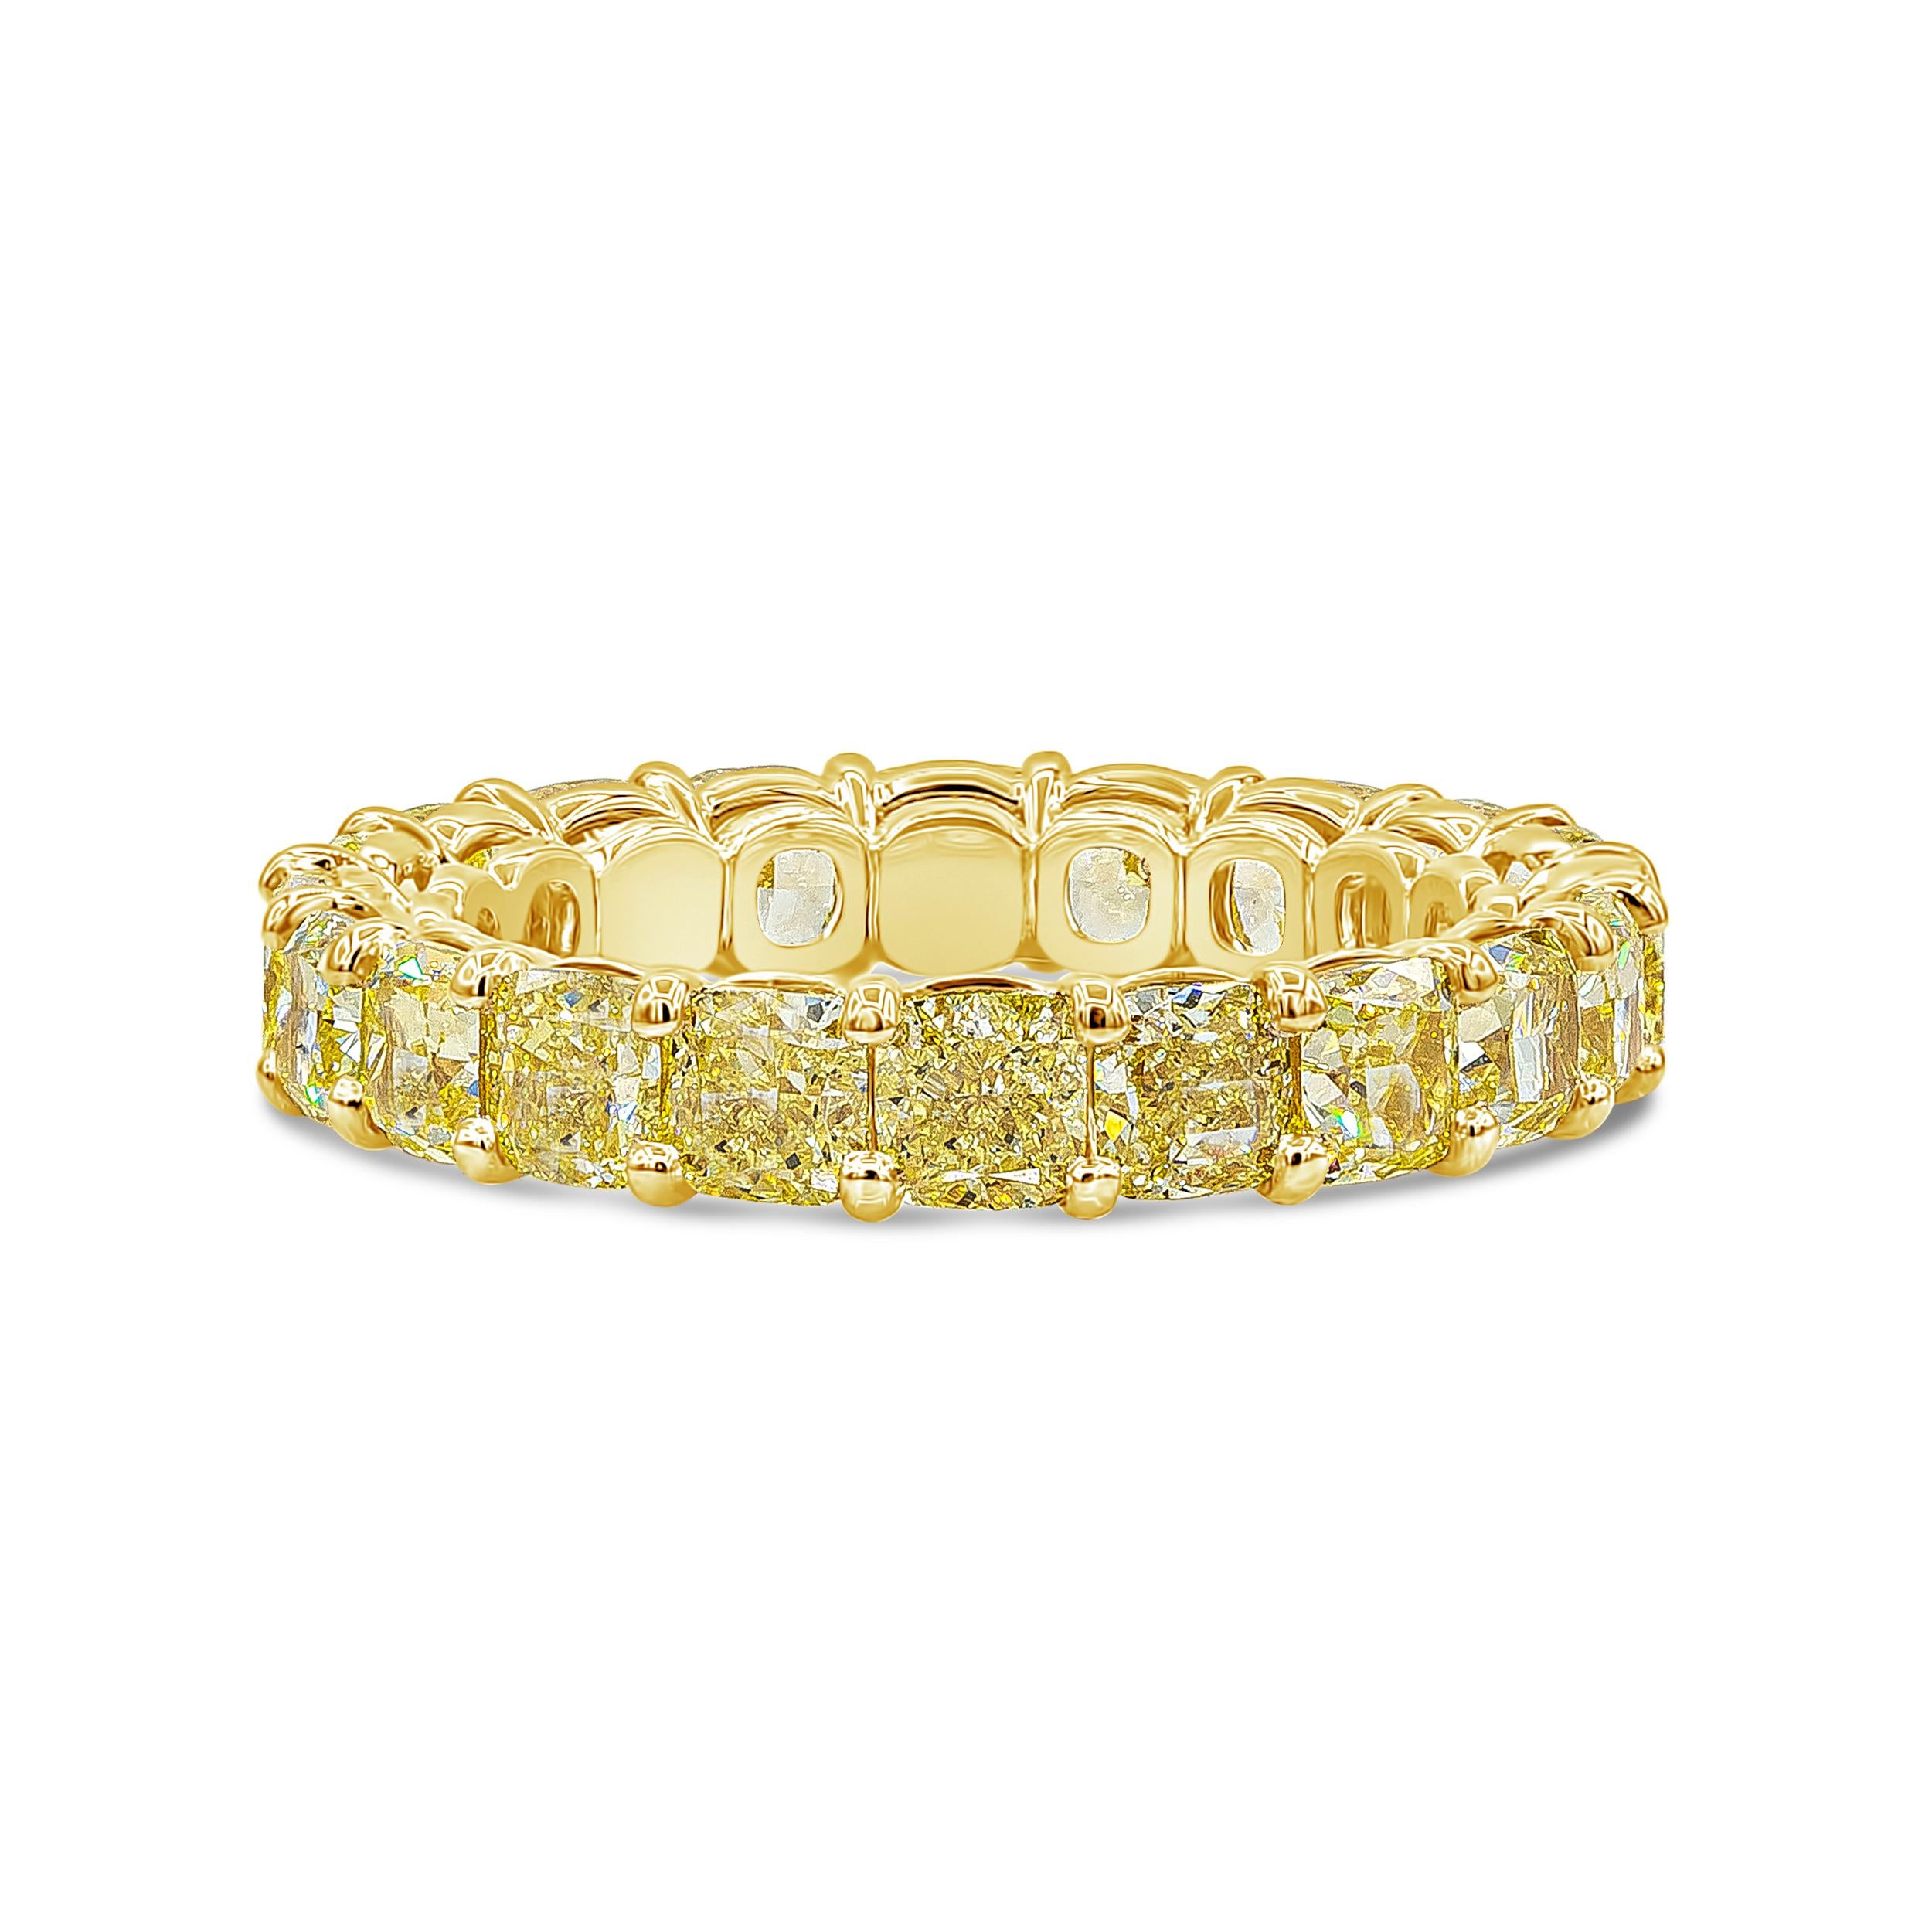 Features a row of cushion cut intense natural yellow diamonds weighing 5.14 carats total, set in a shared-prong style setting made in 18 karat yellow gold. Diamonds are color-rich and are VS in clarity. Size 6 US.

Style available in different price